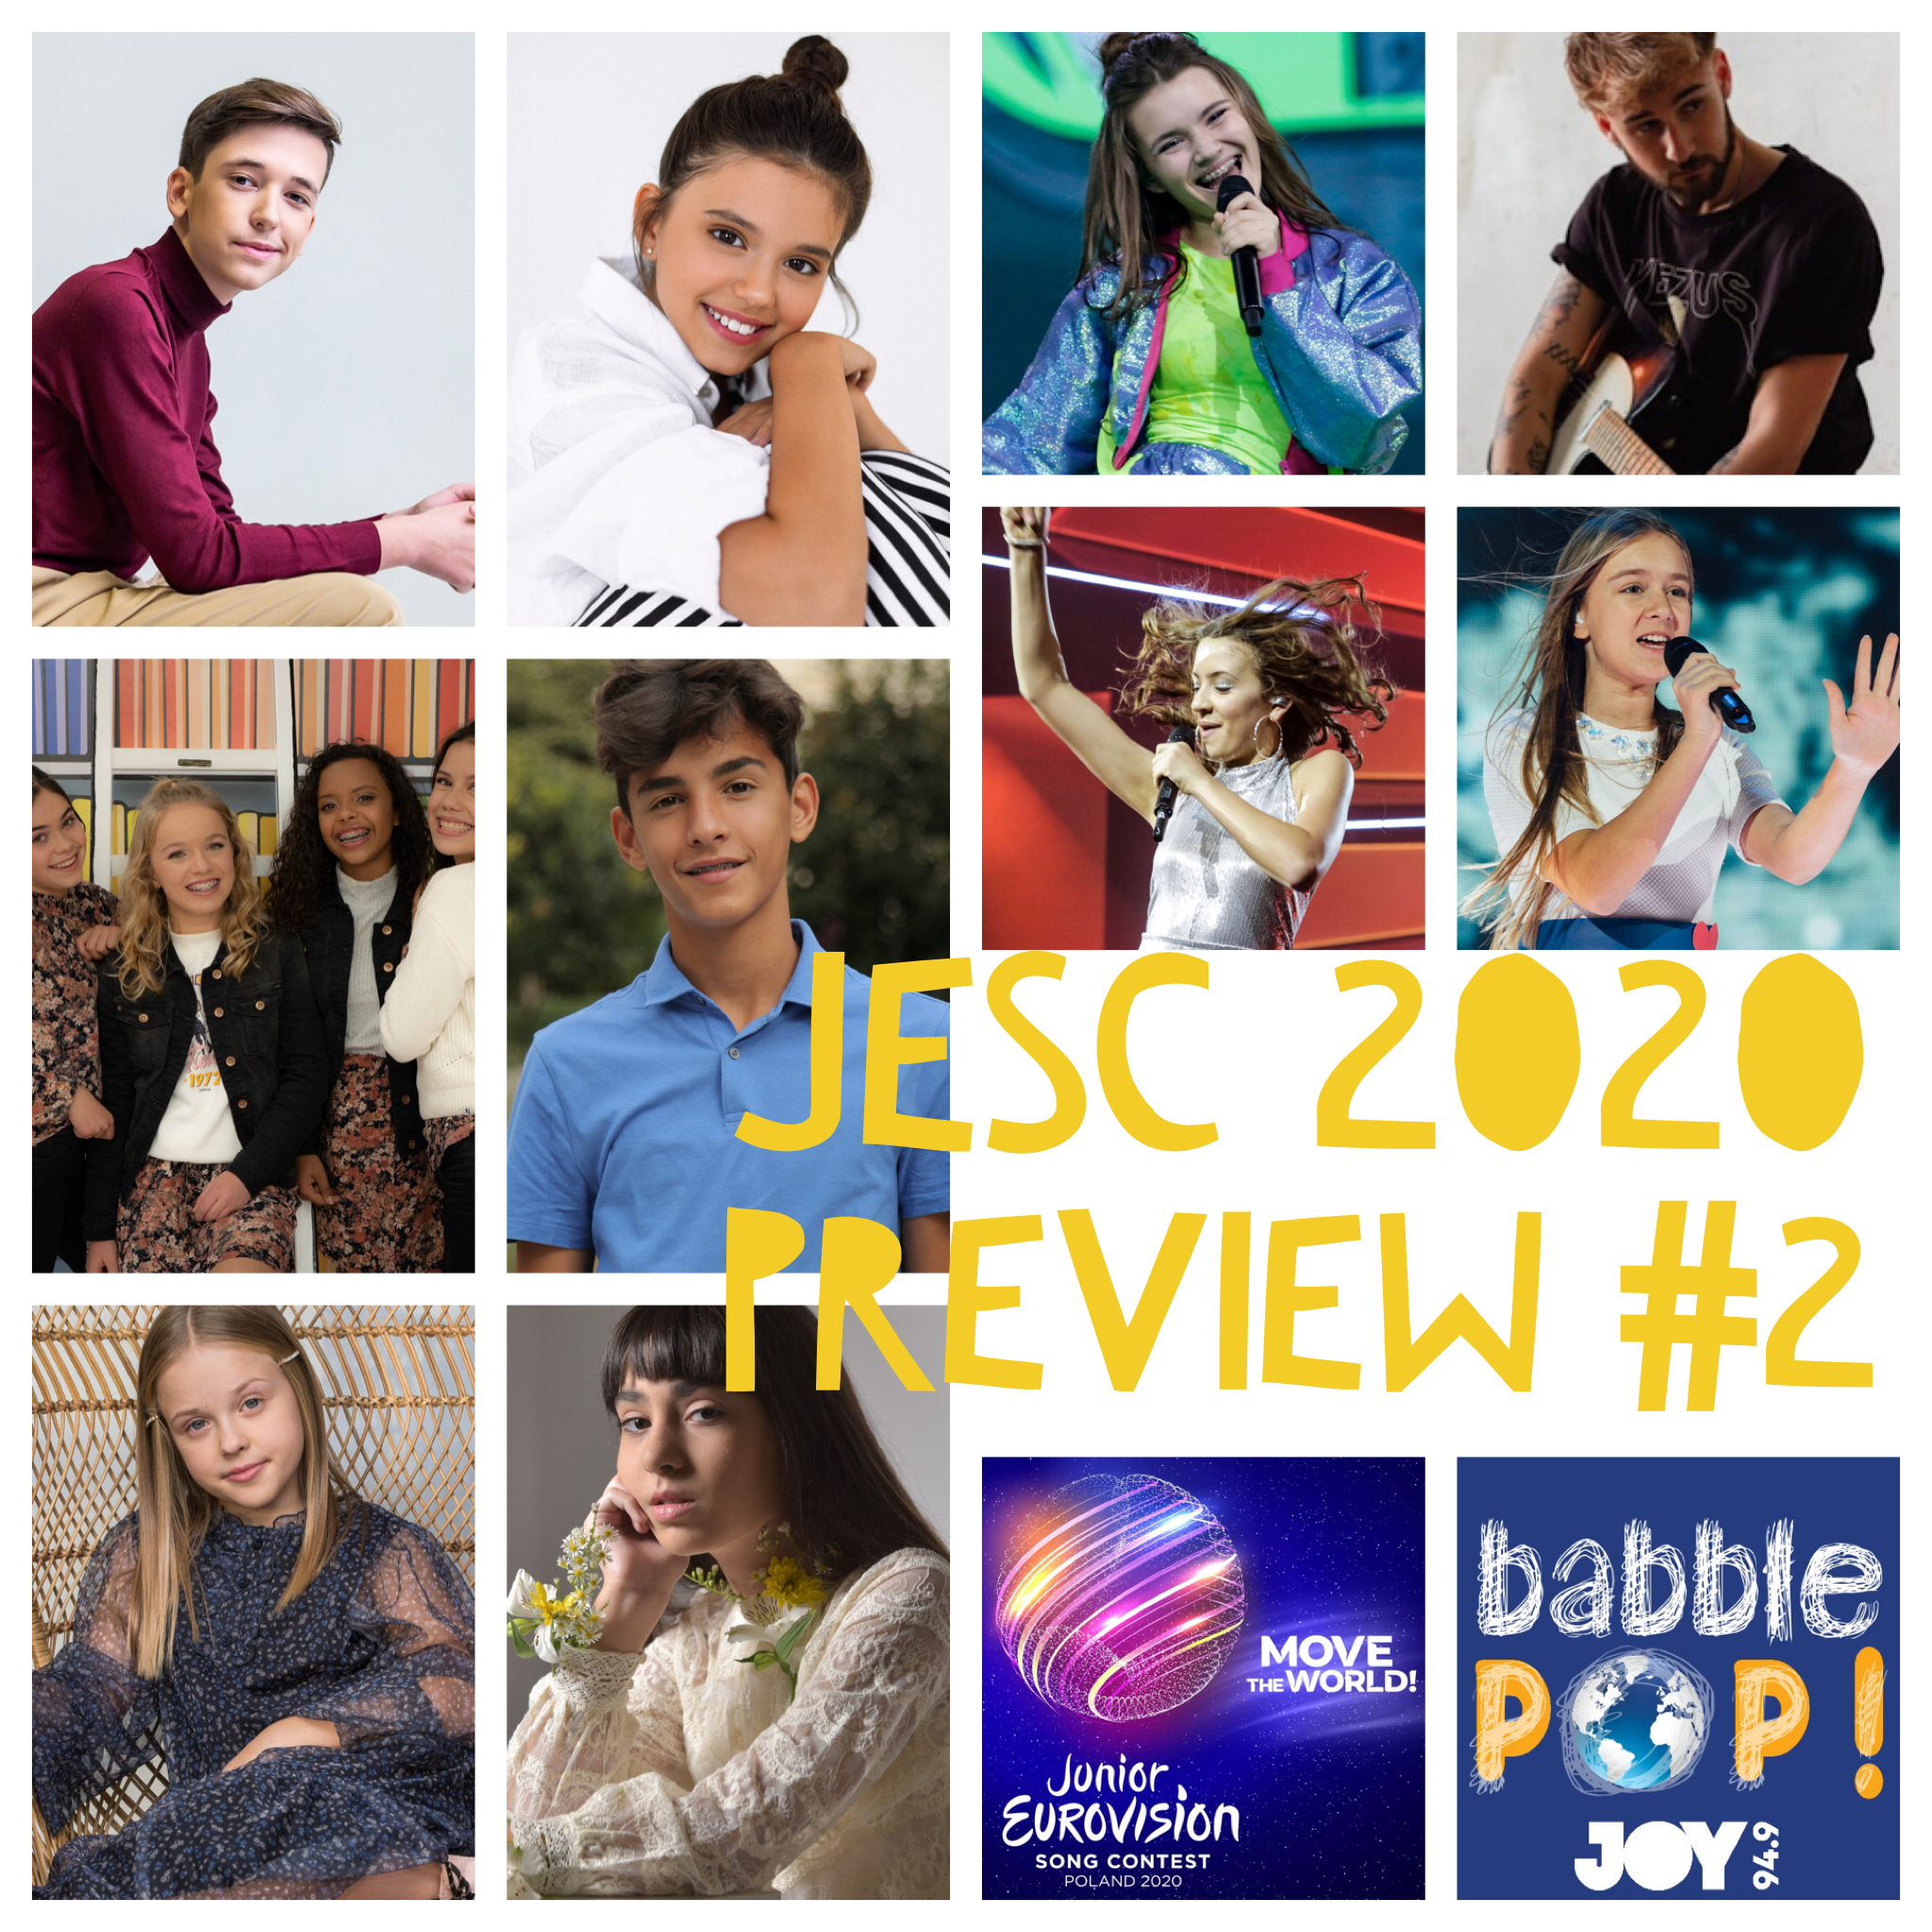 Two hundred and forty-seven – Junior Eurovision 2020 Preview Part 2